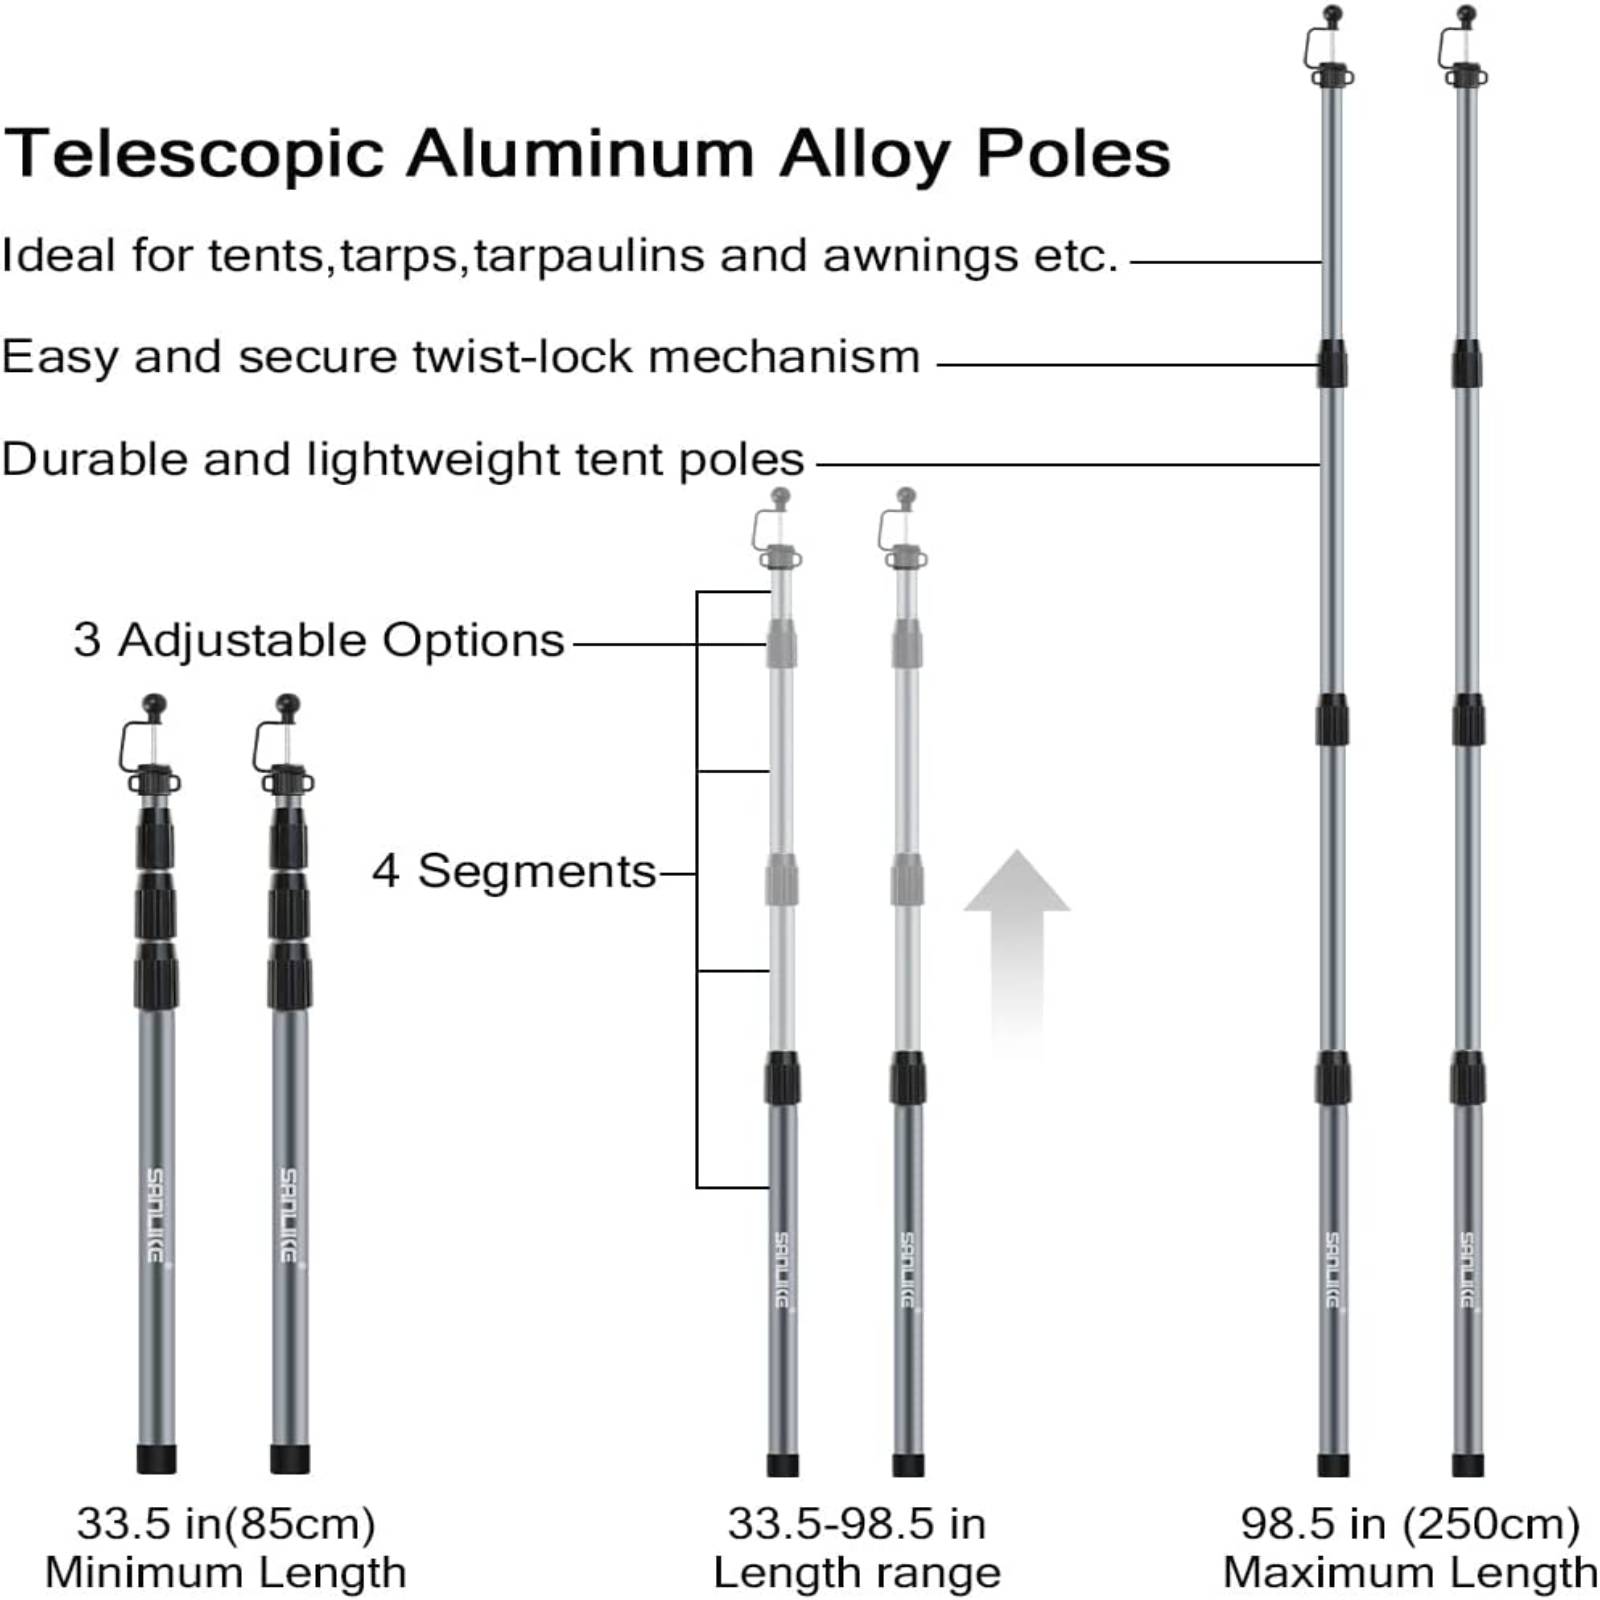 SAN LIKE Telescoping Tarp Poles 98.5in Aluminum Camping Tent Poles Camping poles for Hiking Lightweight Tent Poles for Tarp 4 Section Adjustable Tent Accessories Set of 2 &1 Bag